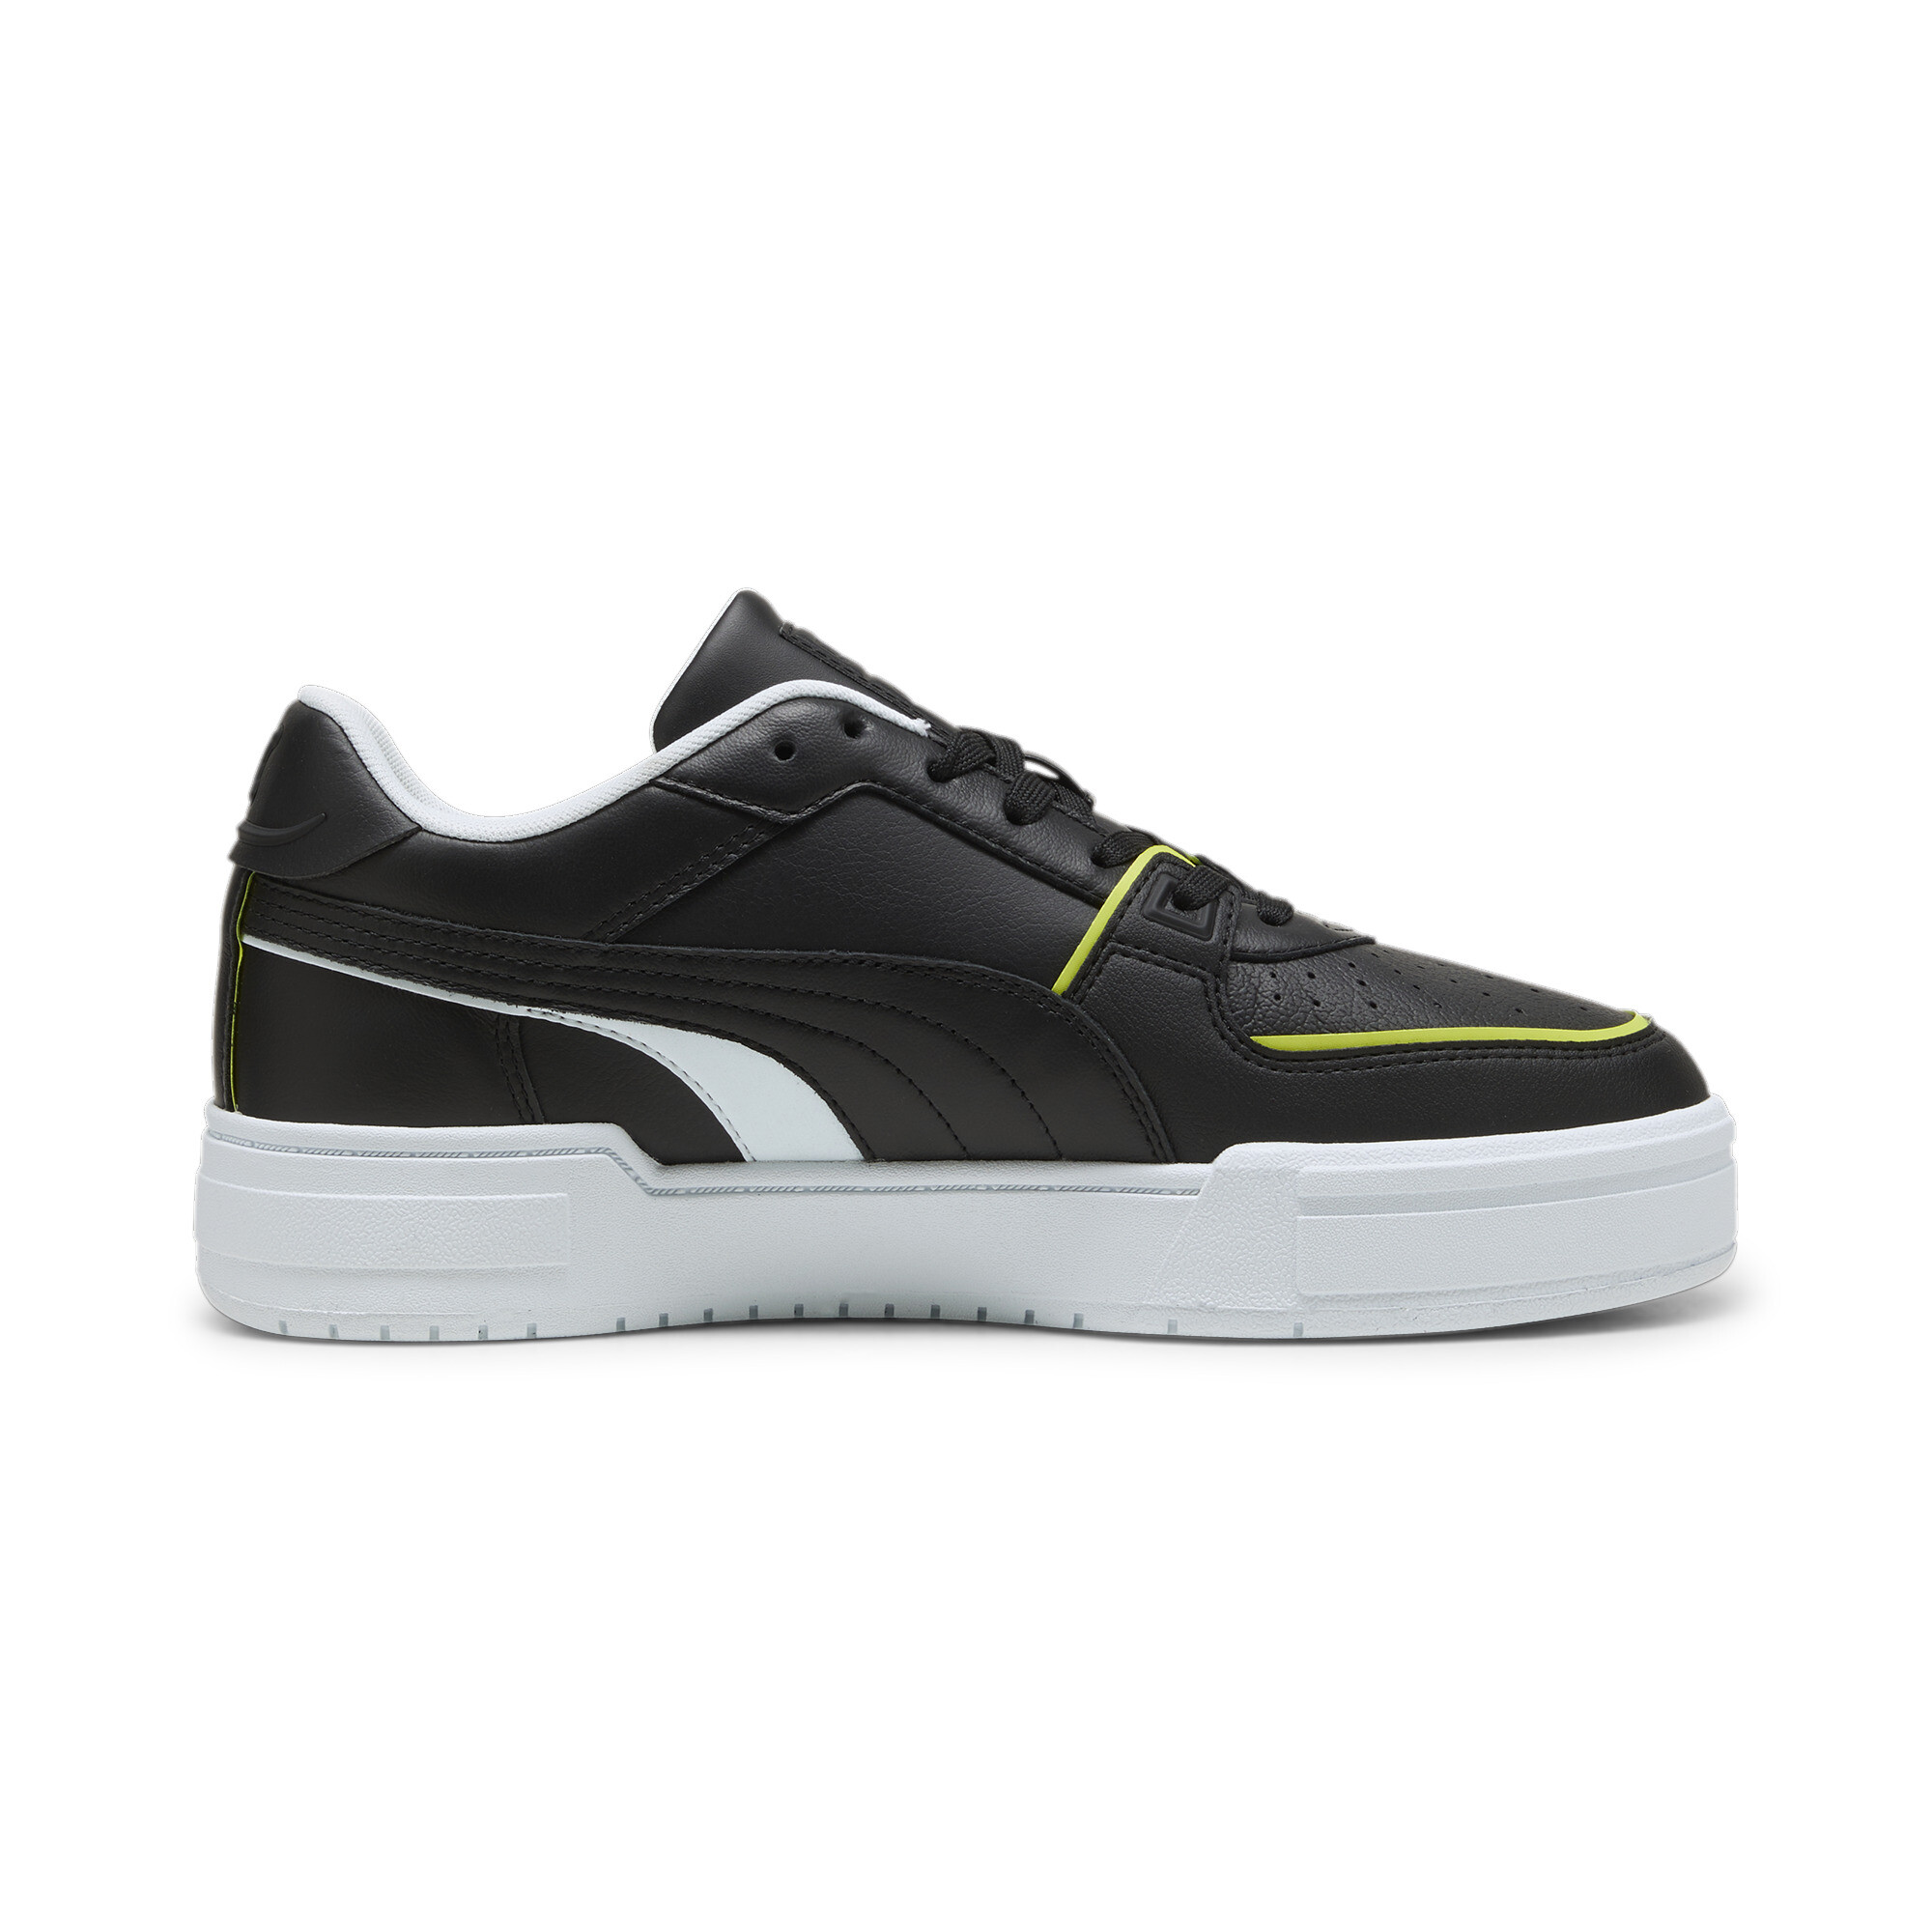 Puma AMG CA Pro Sneakers, Black, Size 44, Shoes